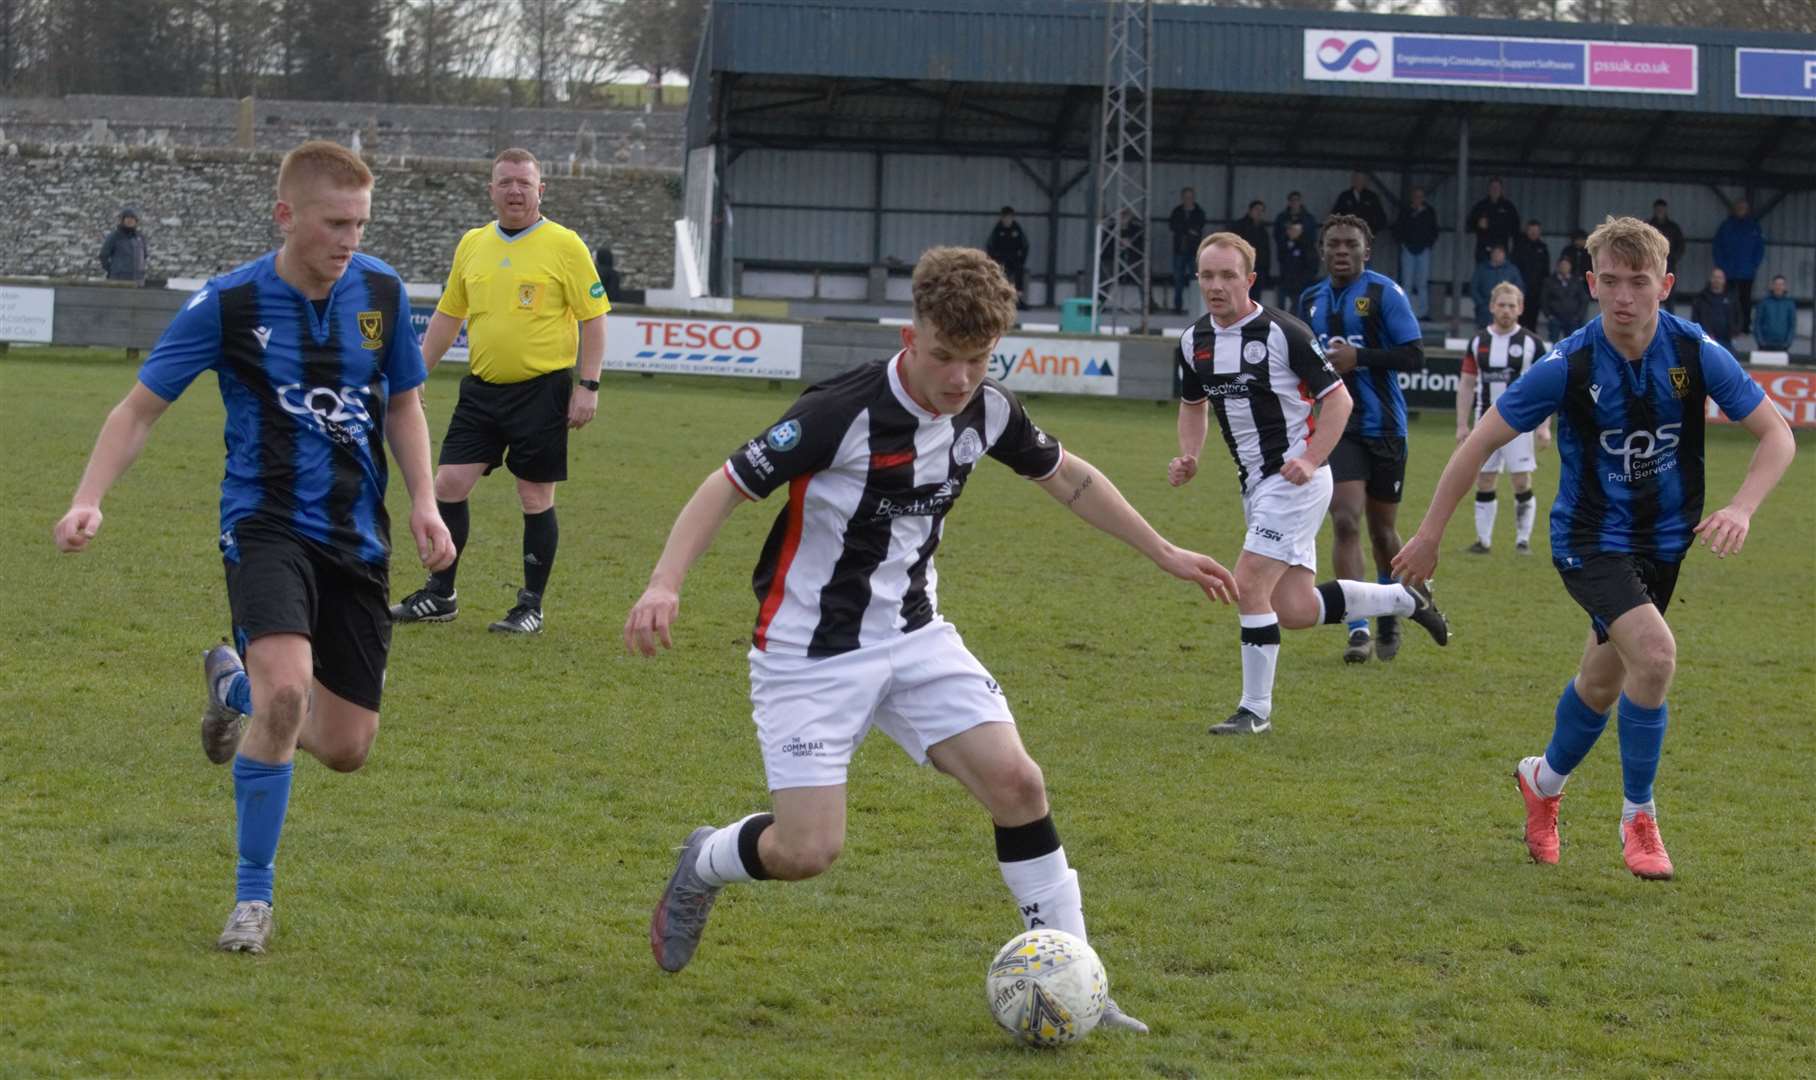 Huntly close down a Wick attack. Photo: Derek Lowe